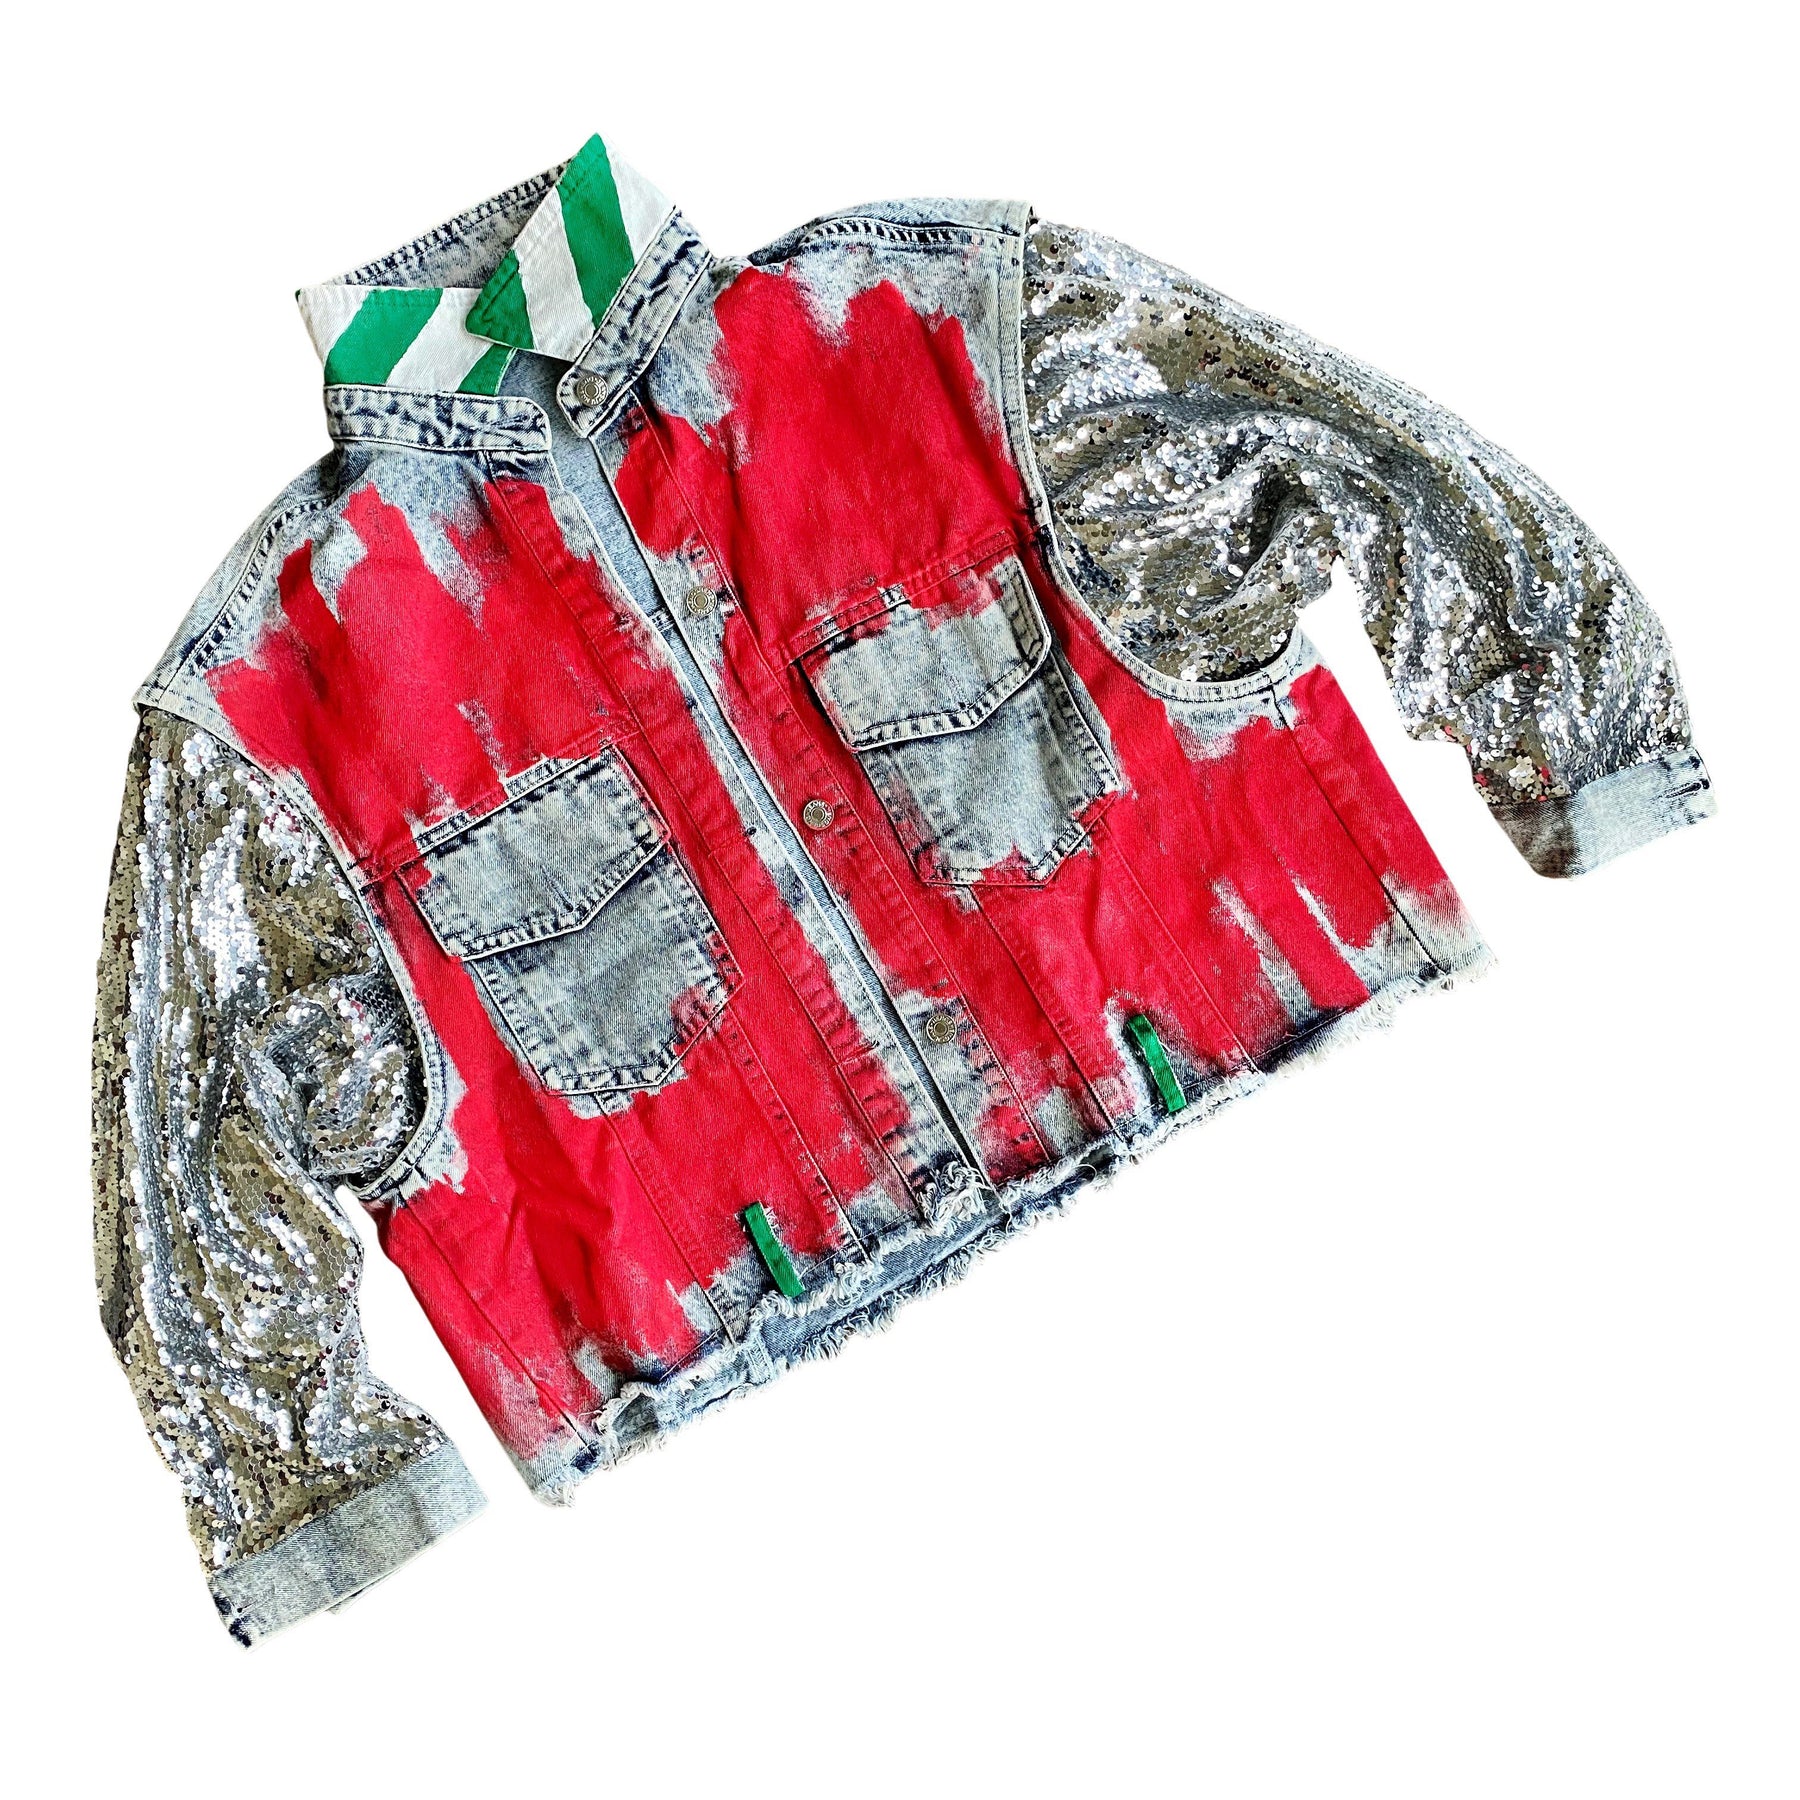 Blue denim jacket with sequined sleeves. Red base painted throughout, with gingerbread man on back, and BITE ME in semi circle above it. Signed @wrenandglory.